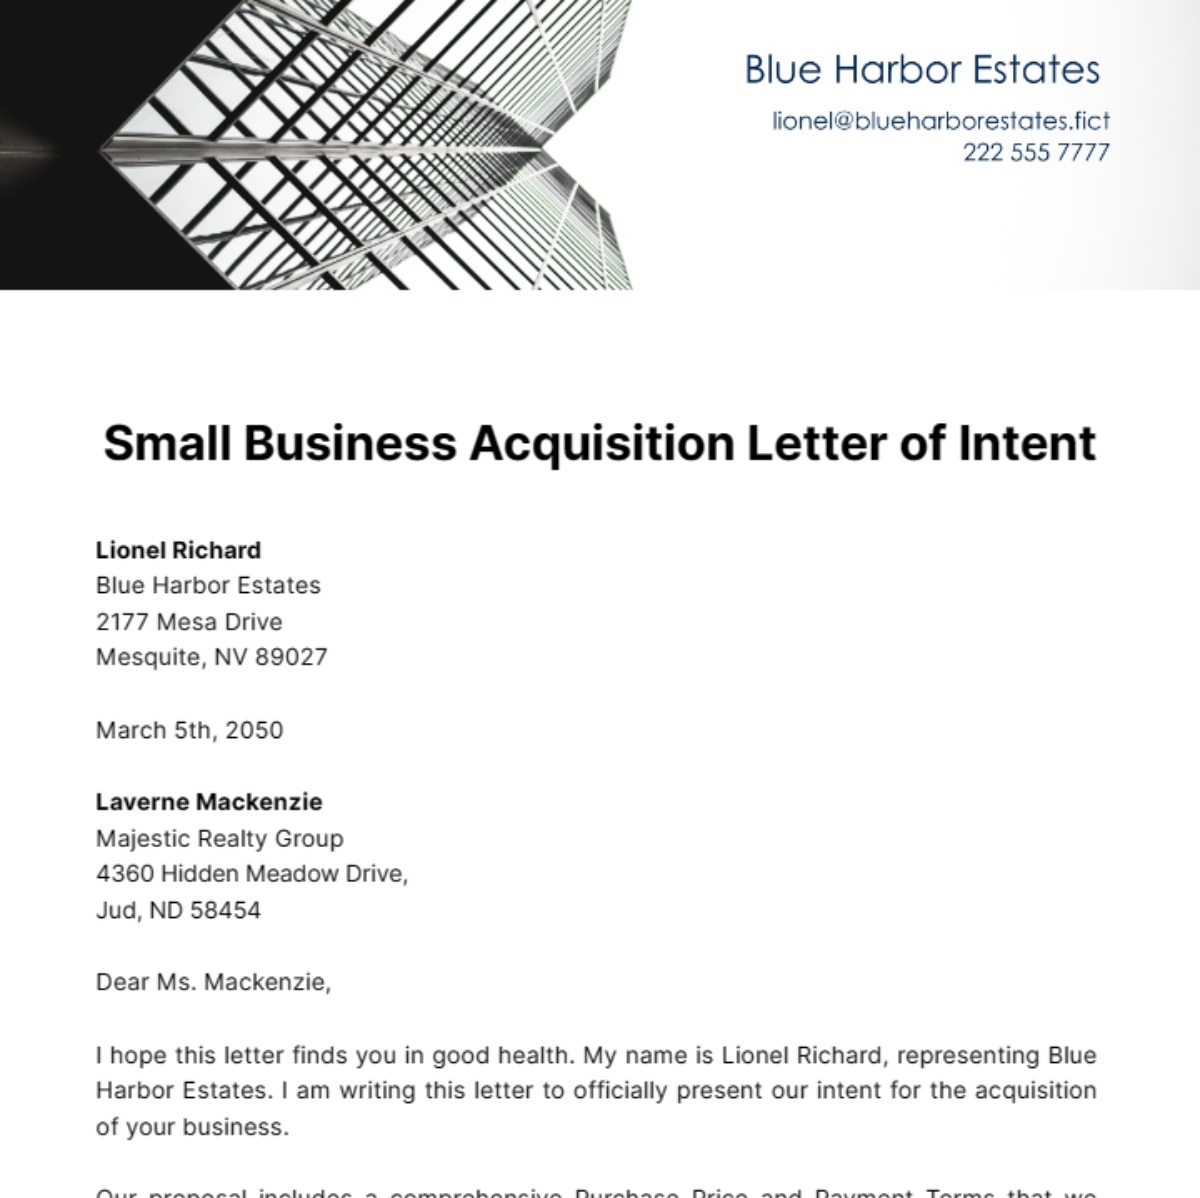 Small Business Acquisition Letter of Intent Template